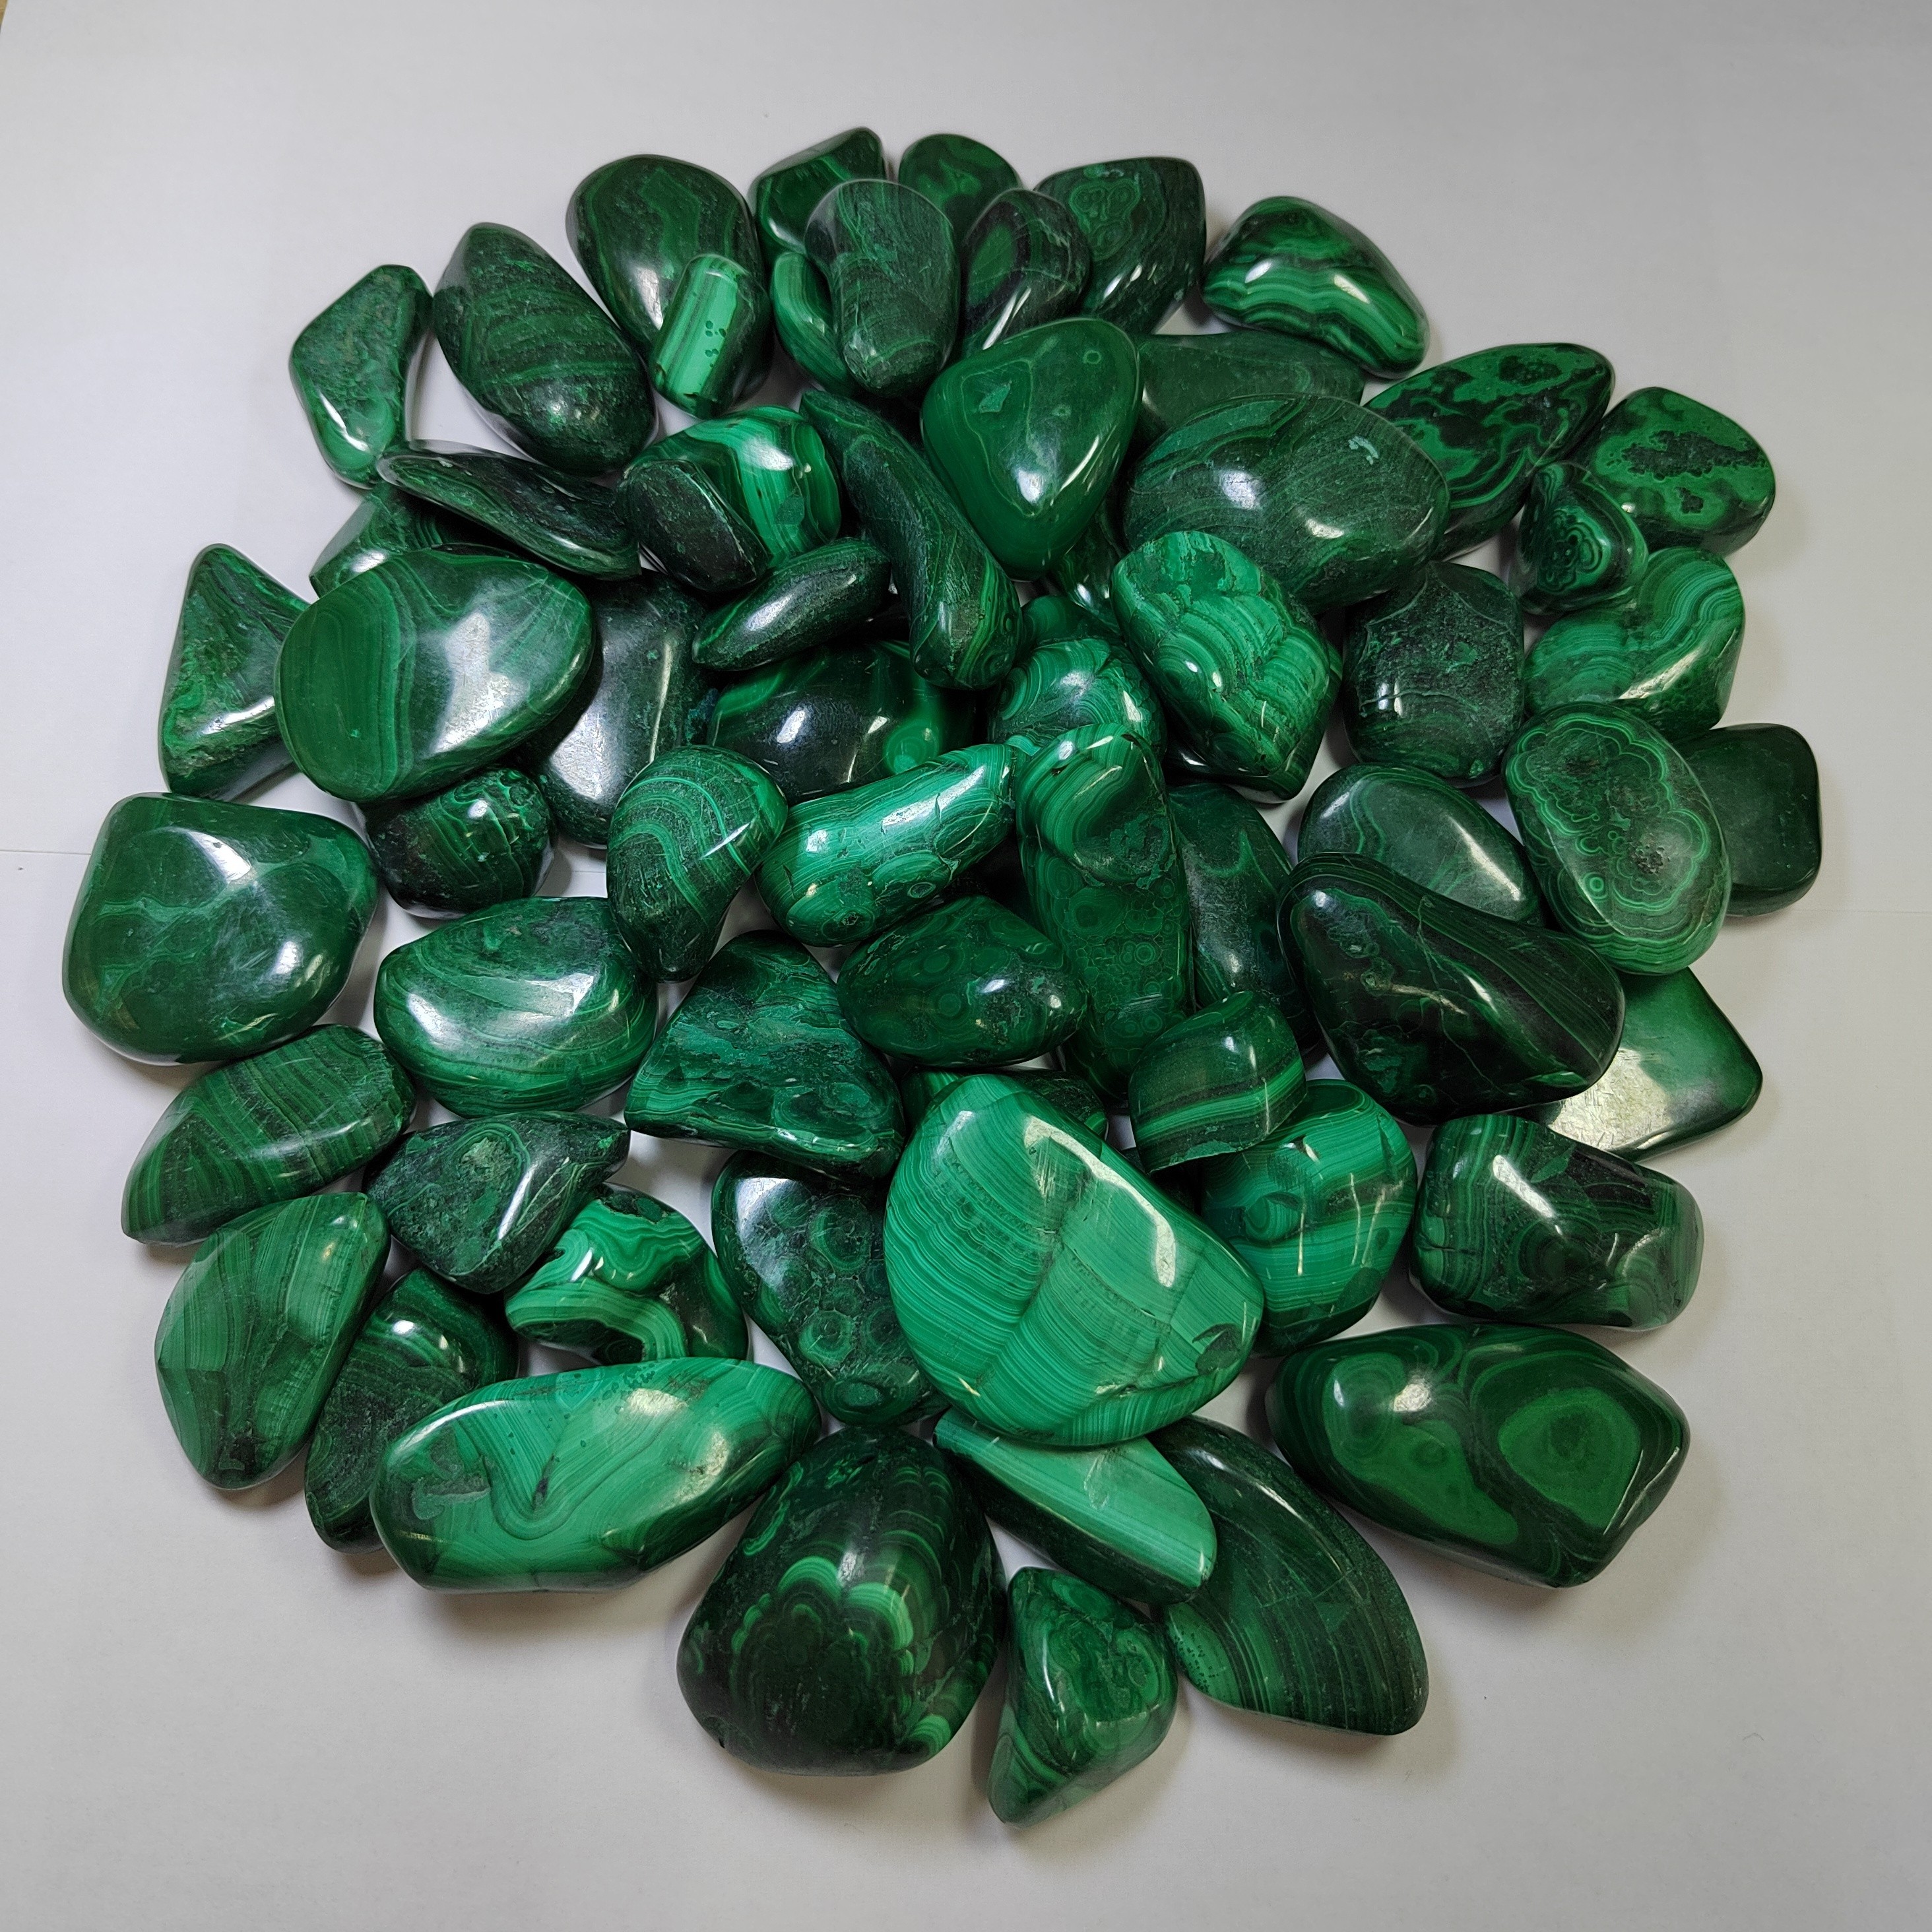 

50g Natural Malachite Raw Stone, 1pc To 3pcs Random For Diy Decors, New Year, Christmas, Holiday Gift Jewelry Making Supplies